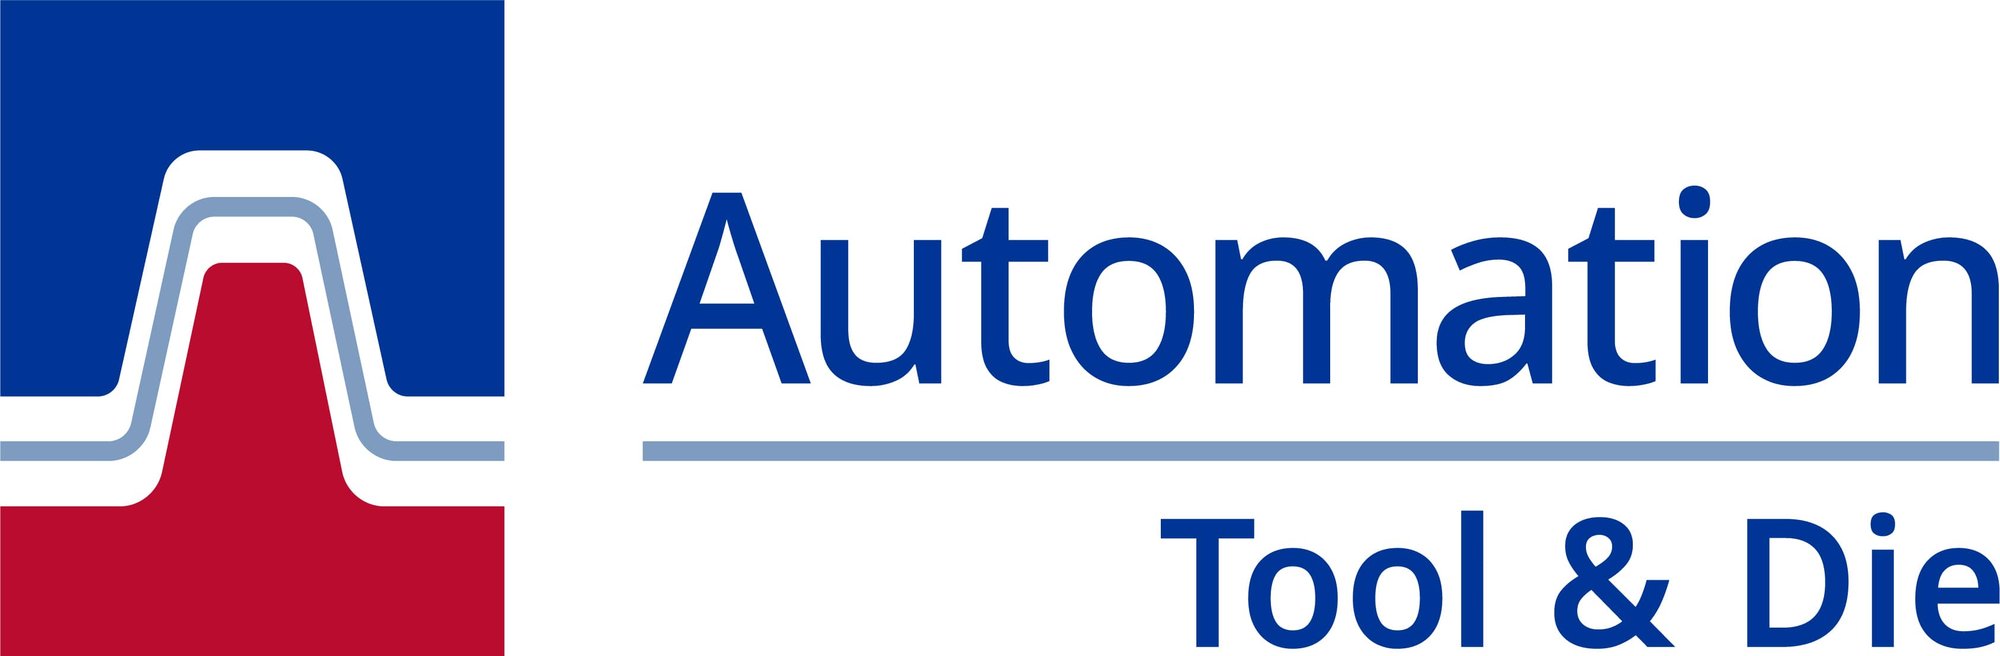 Automation Tool & Die logo